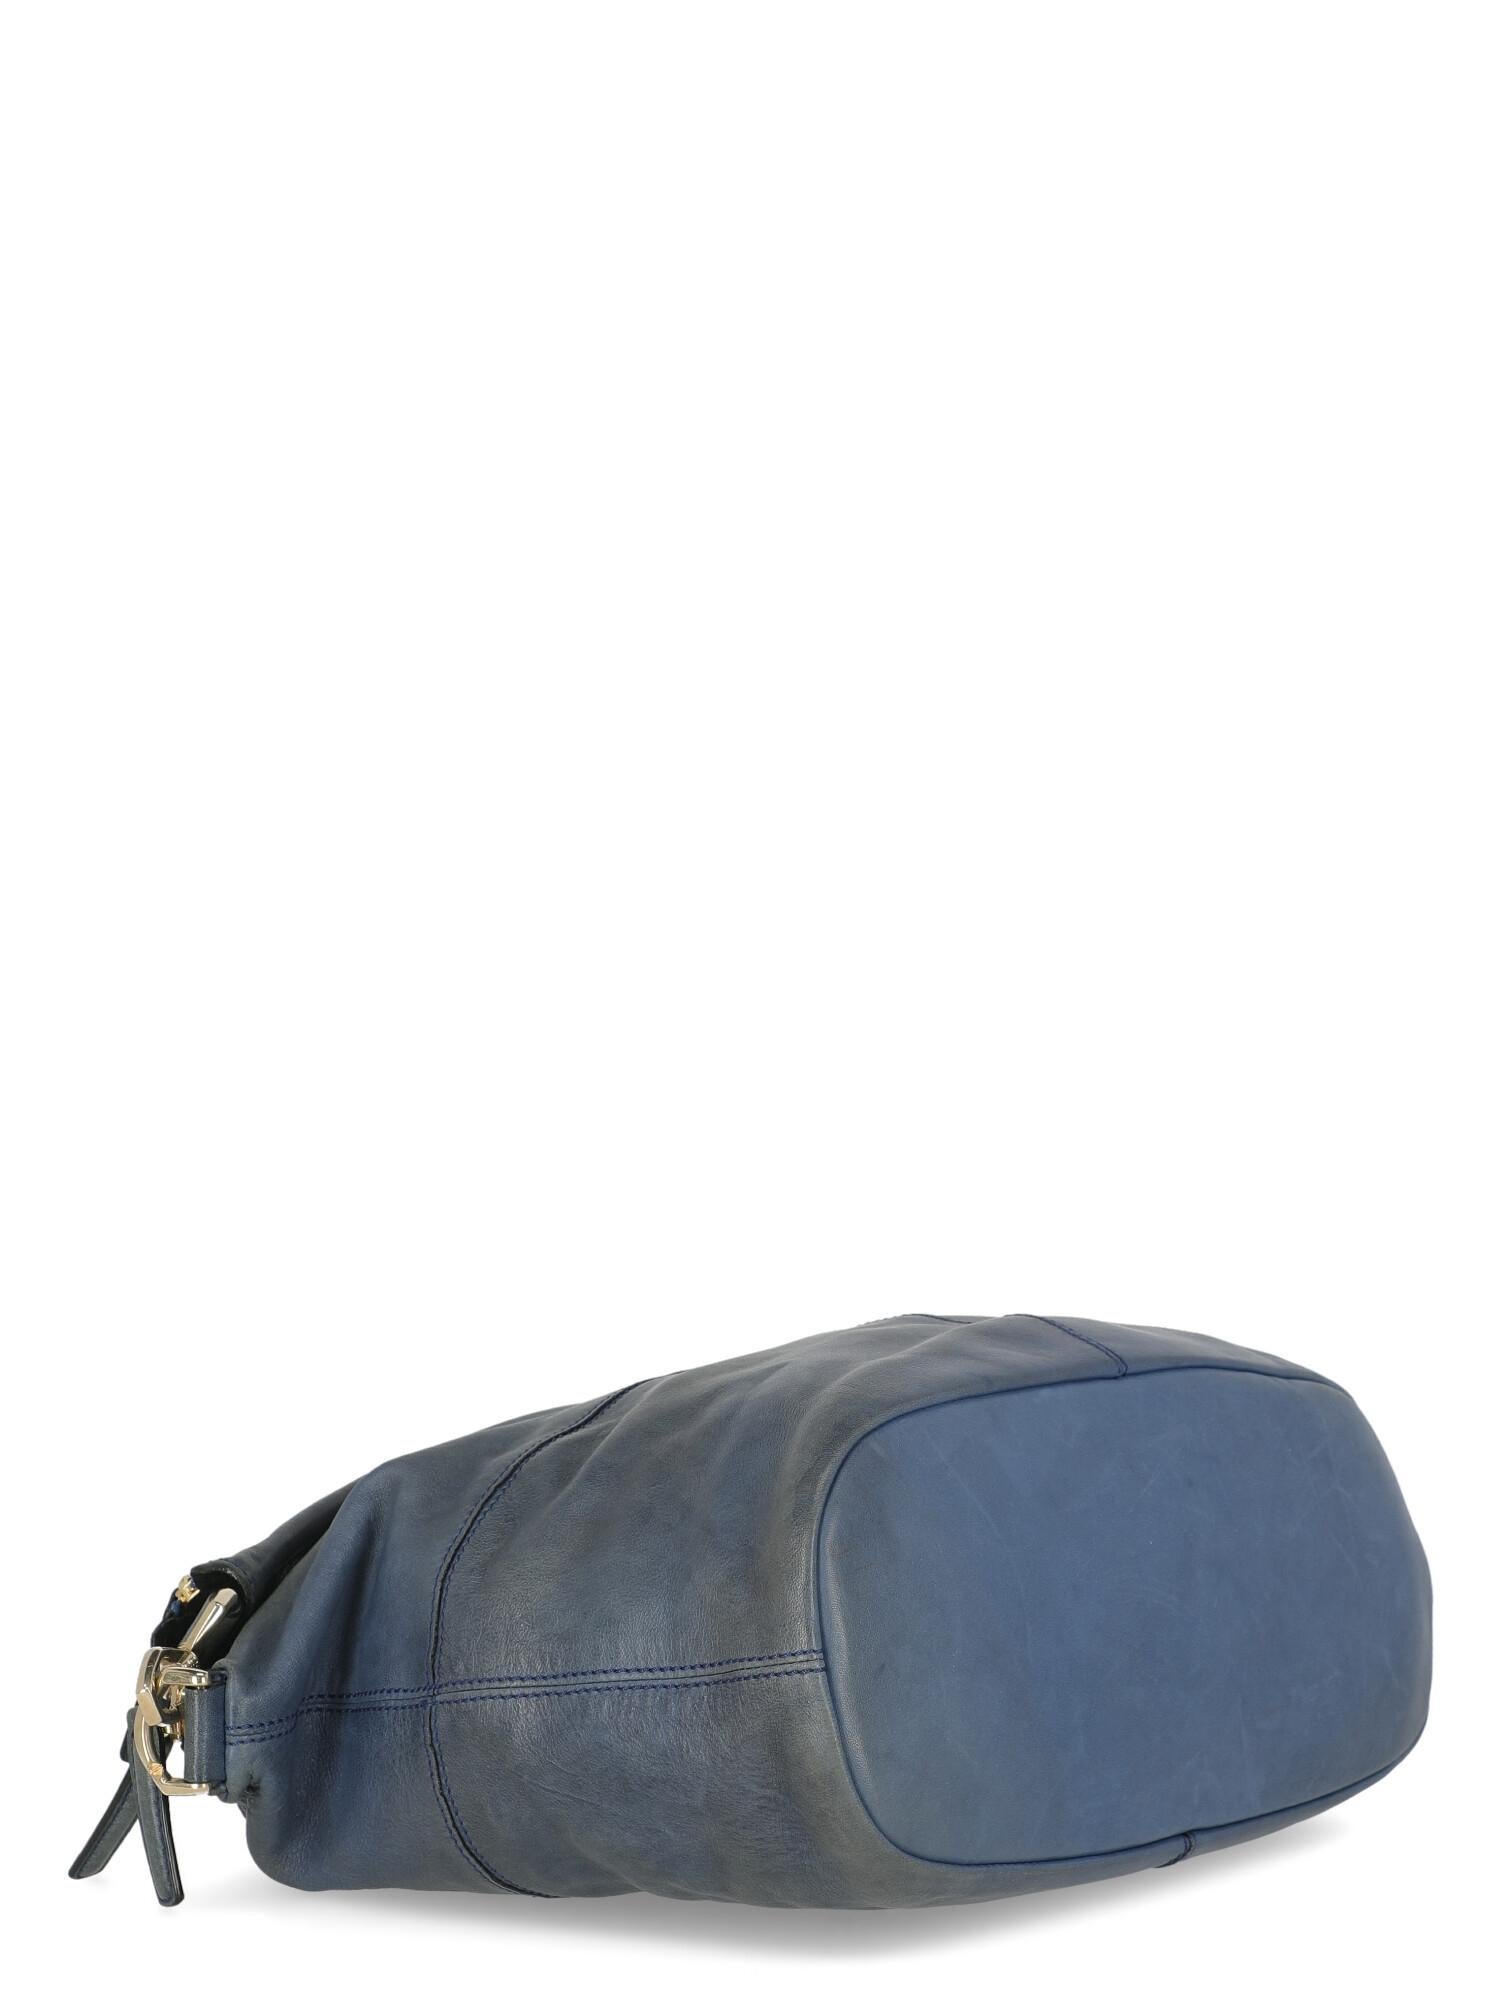 Women's Givenchy Woman Shoulder bag Nightingale Navy Leather